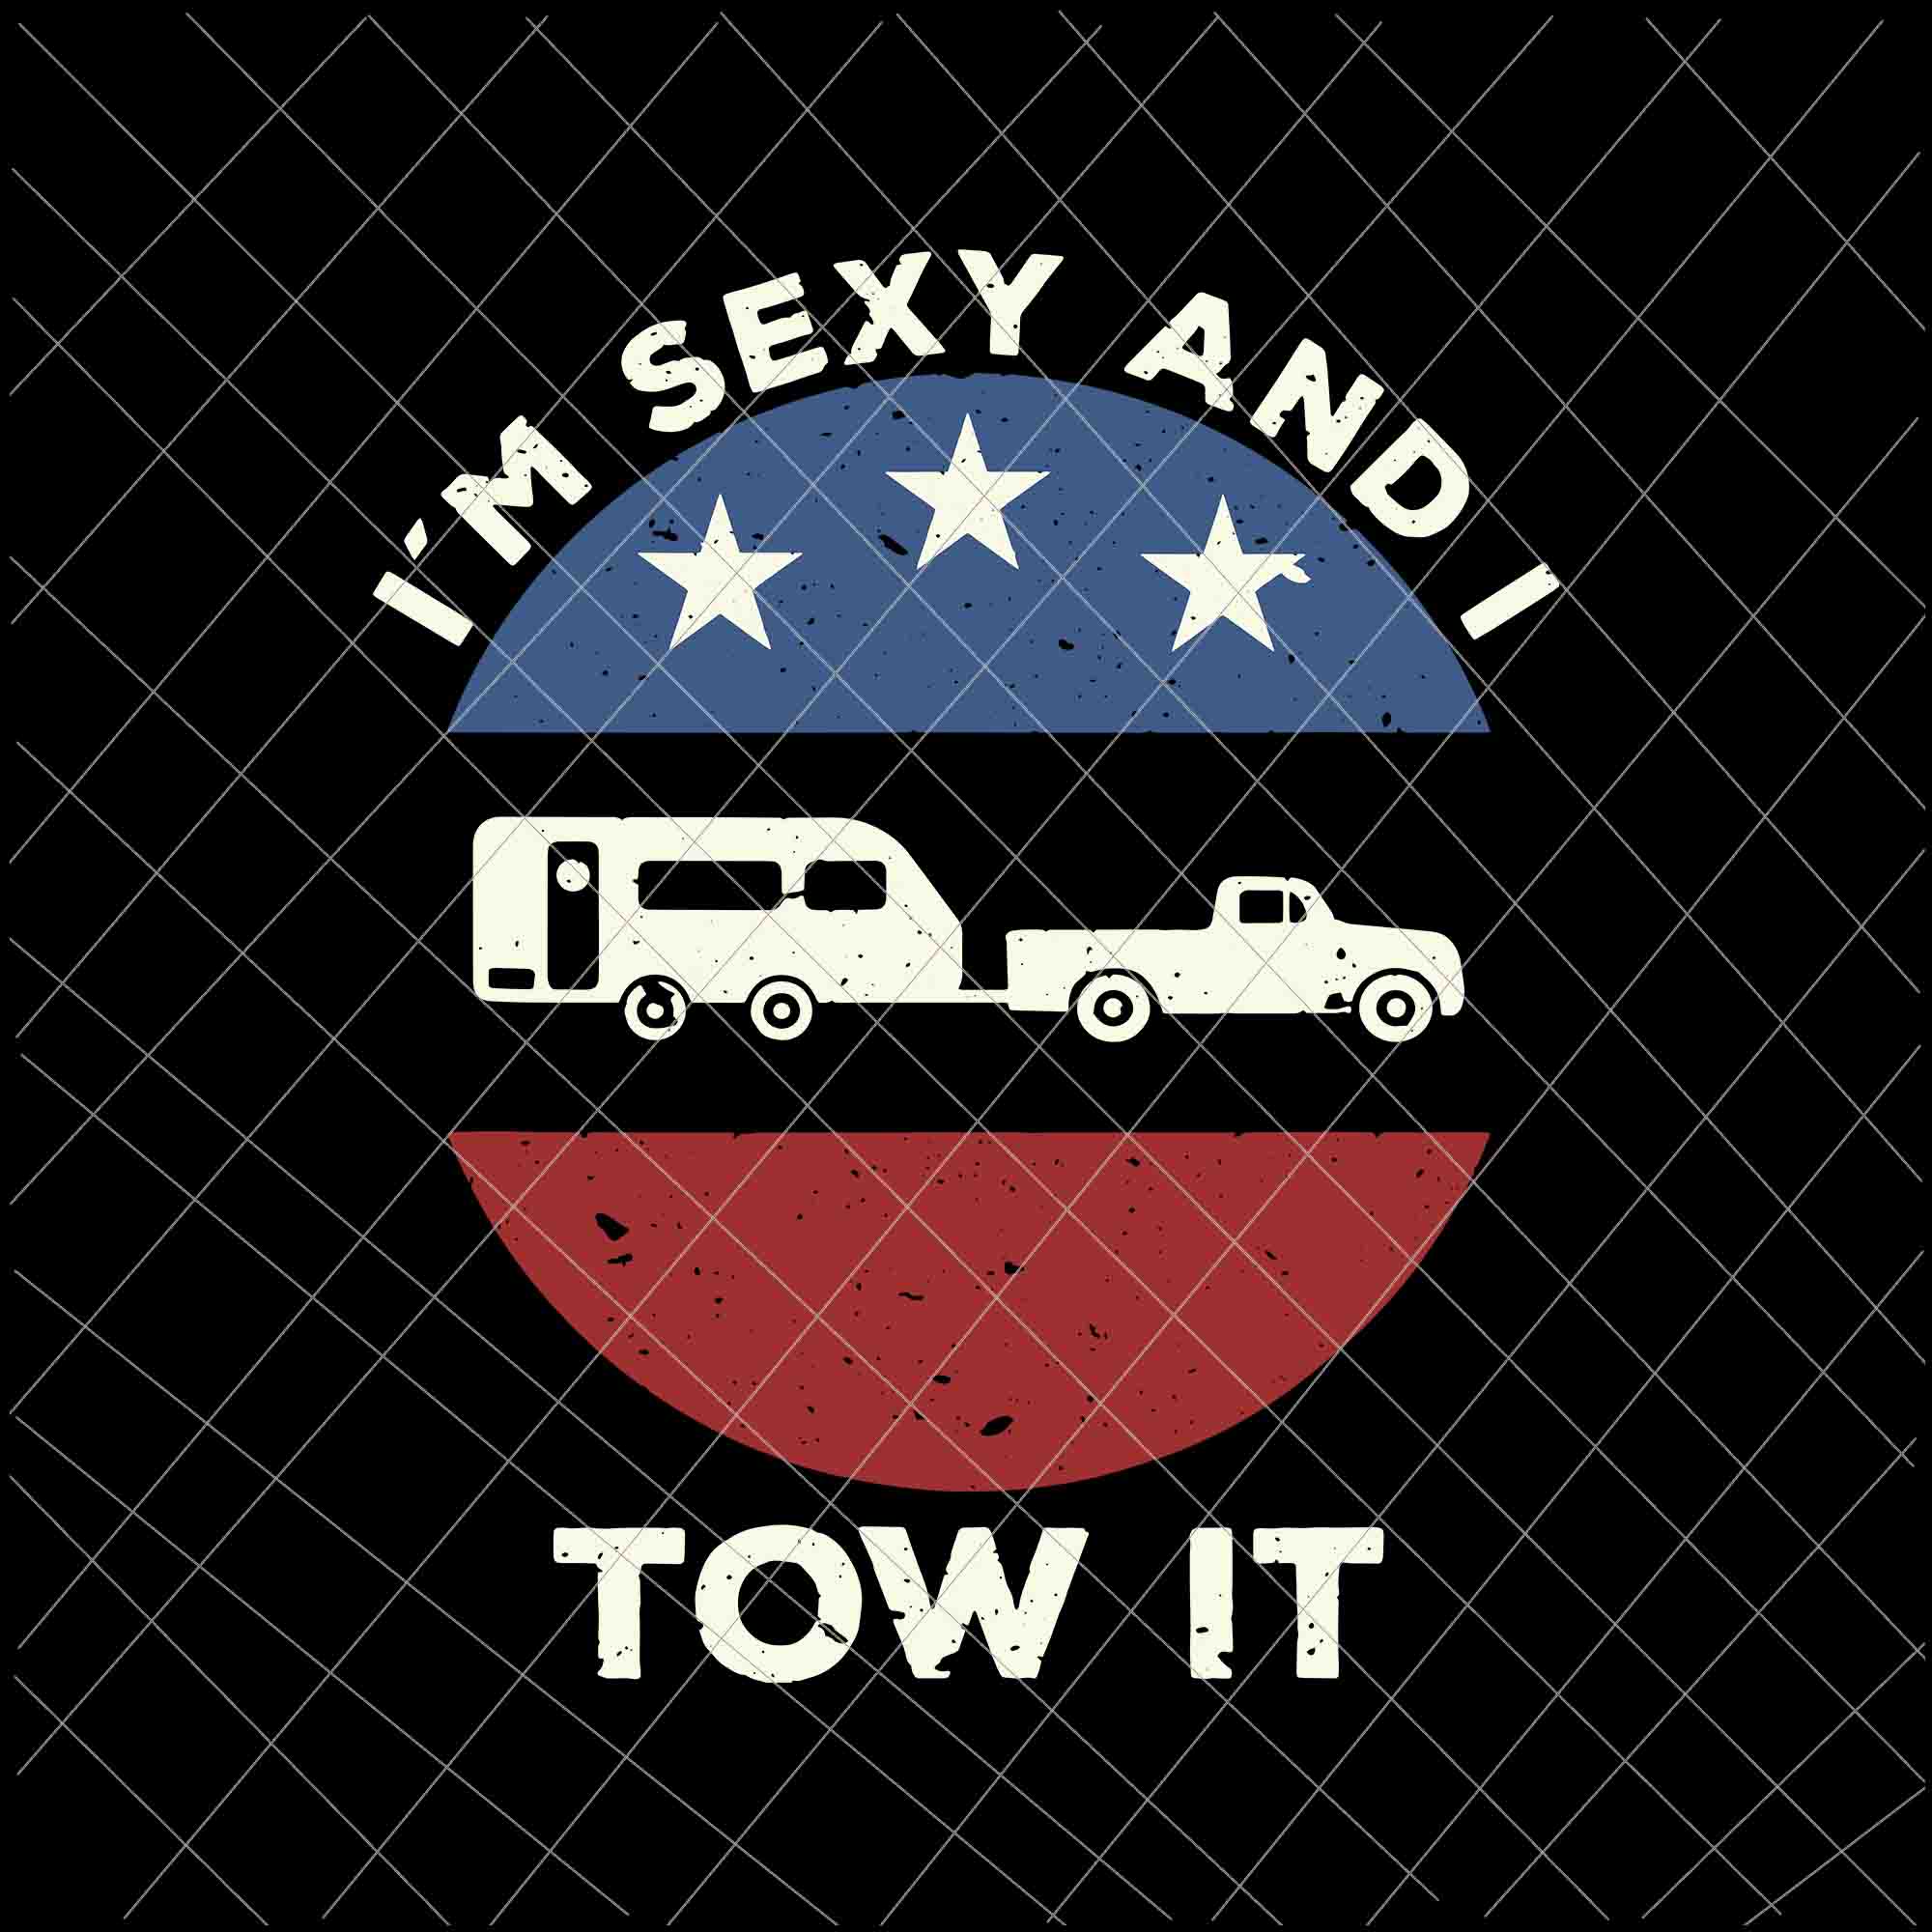 I'm Sexy And I Tow It Svg, Funny Camping RV Svg, Camping svg, Quote Camping Svg